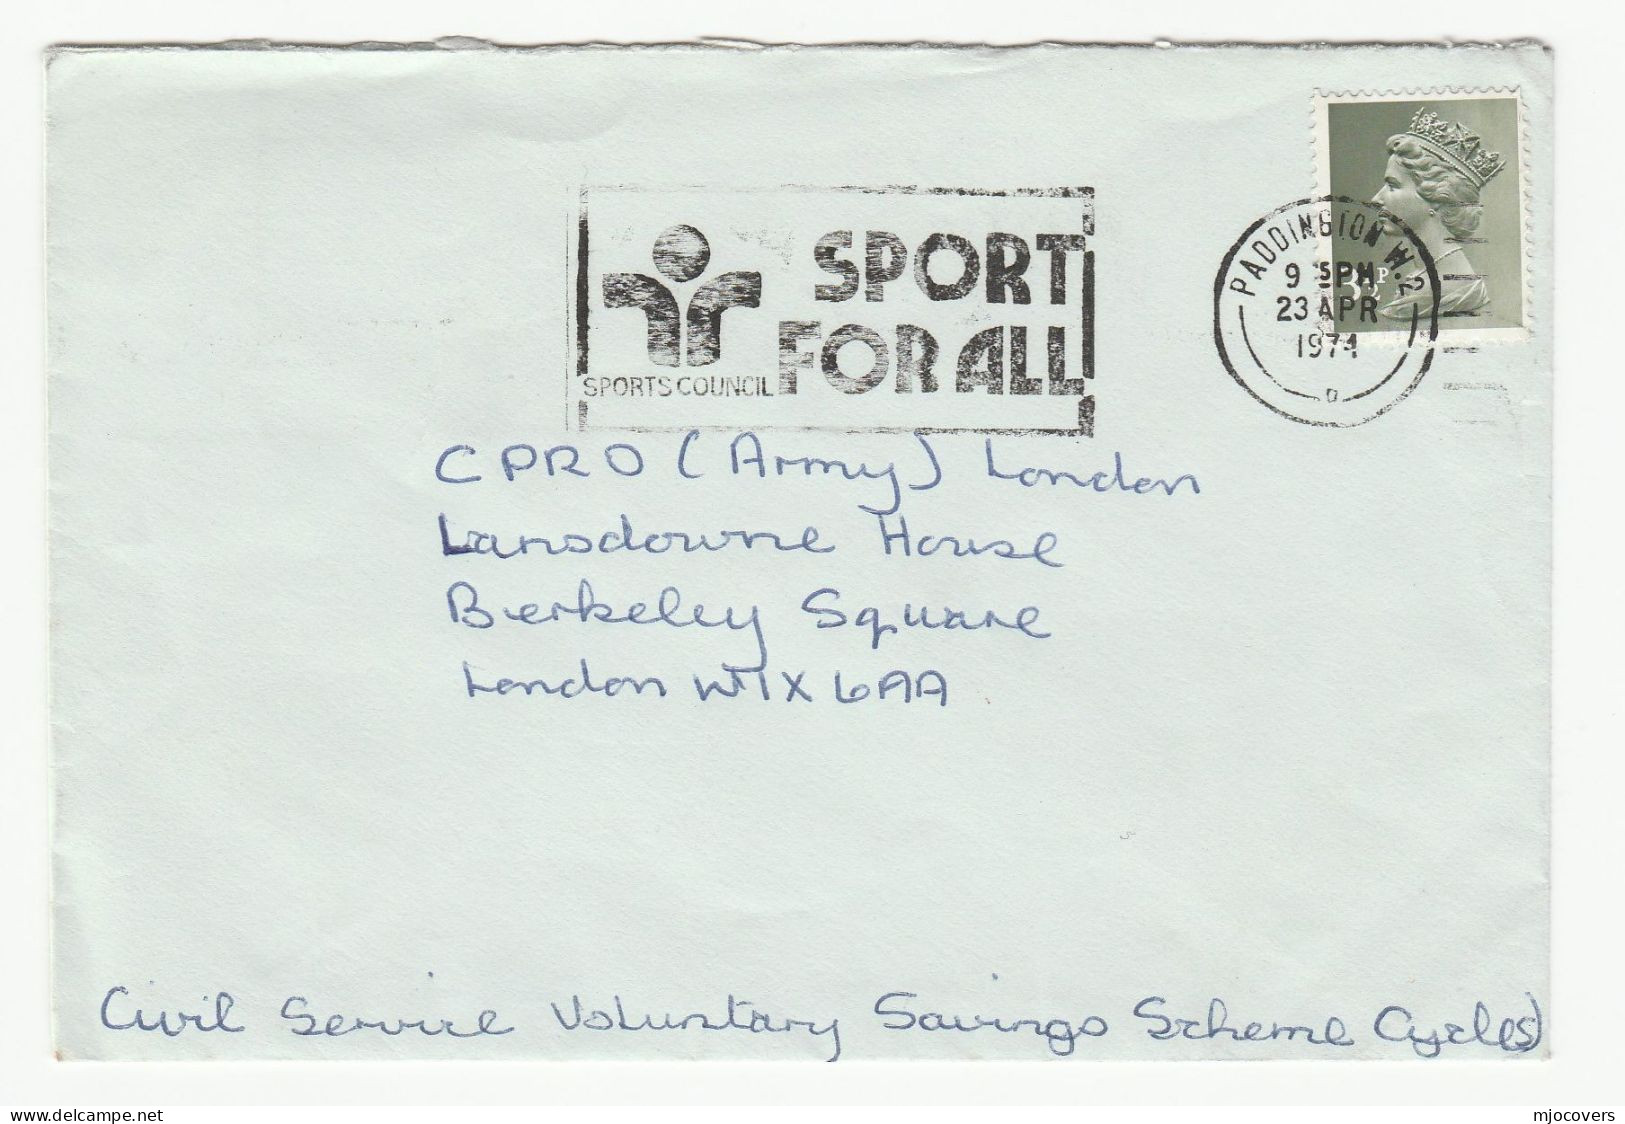 1974 Cover SPORT For ALL Paddington SLOGAN  GB  Stamps - Lettres & Documents